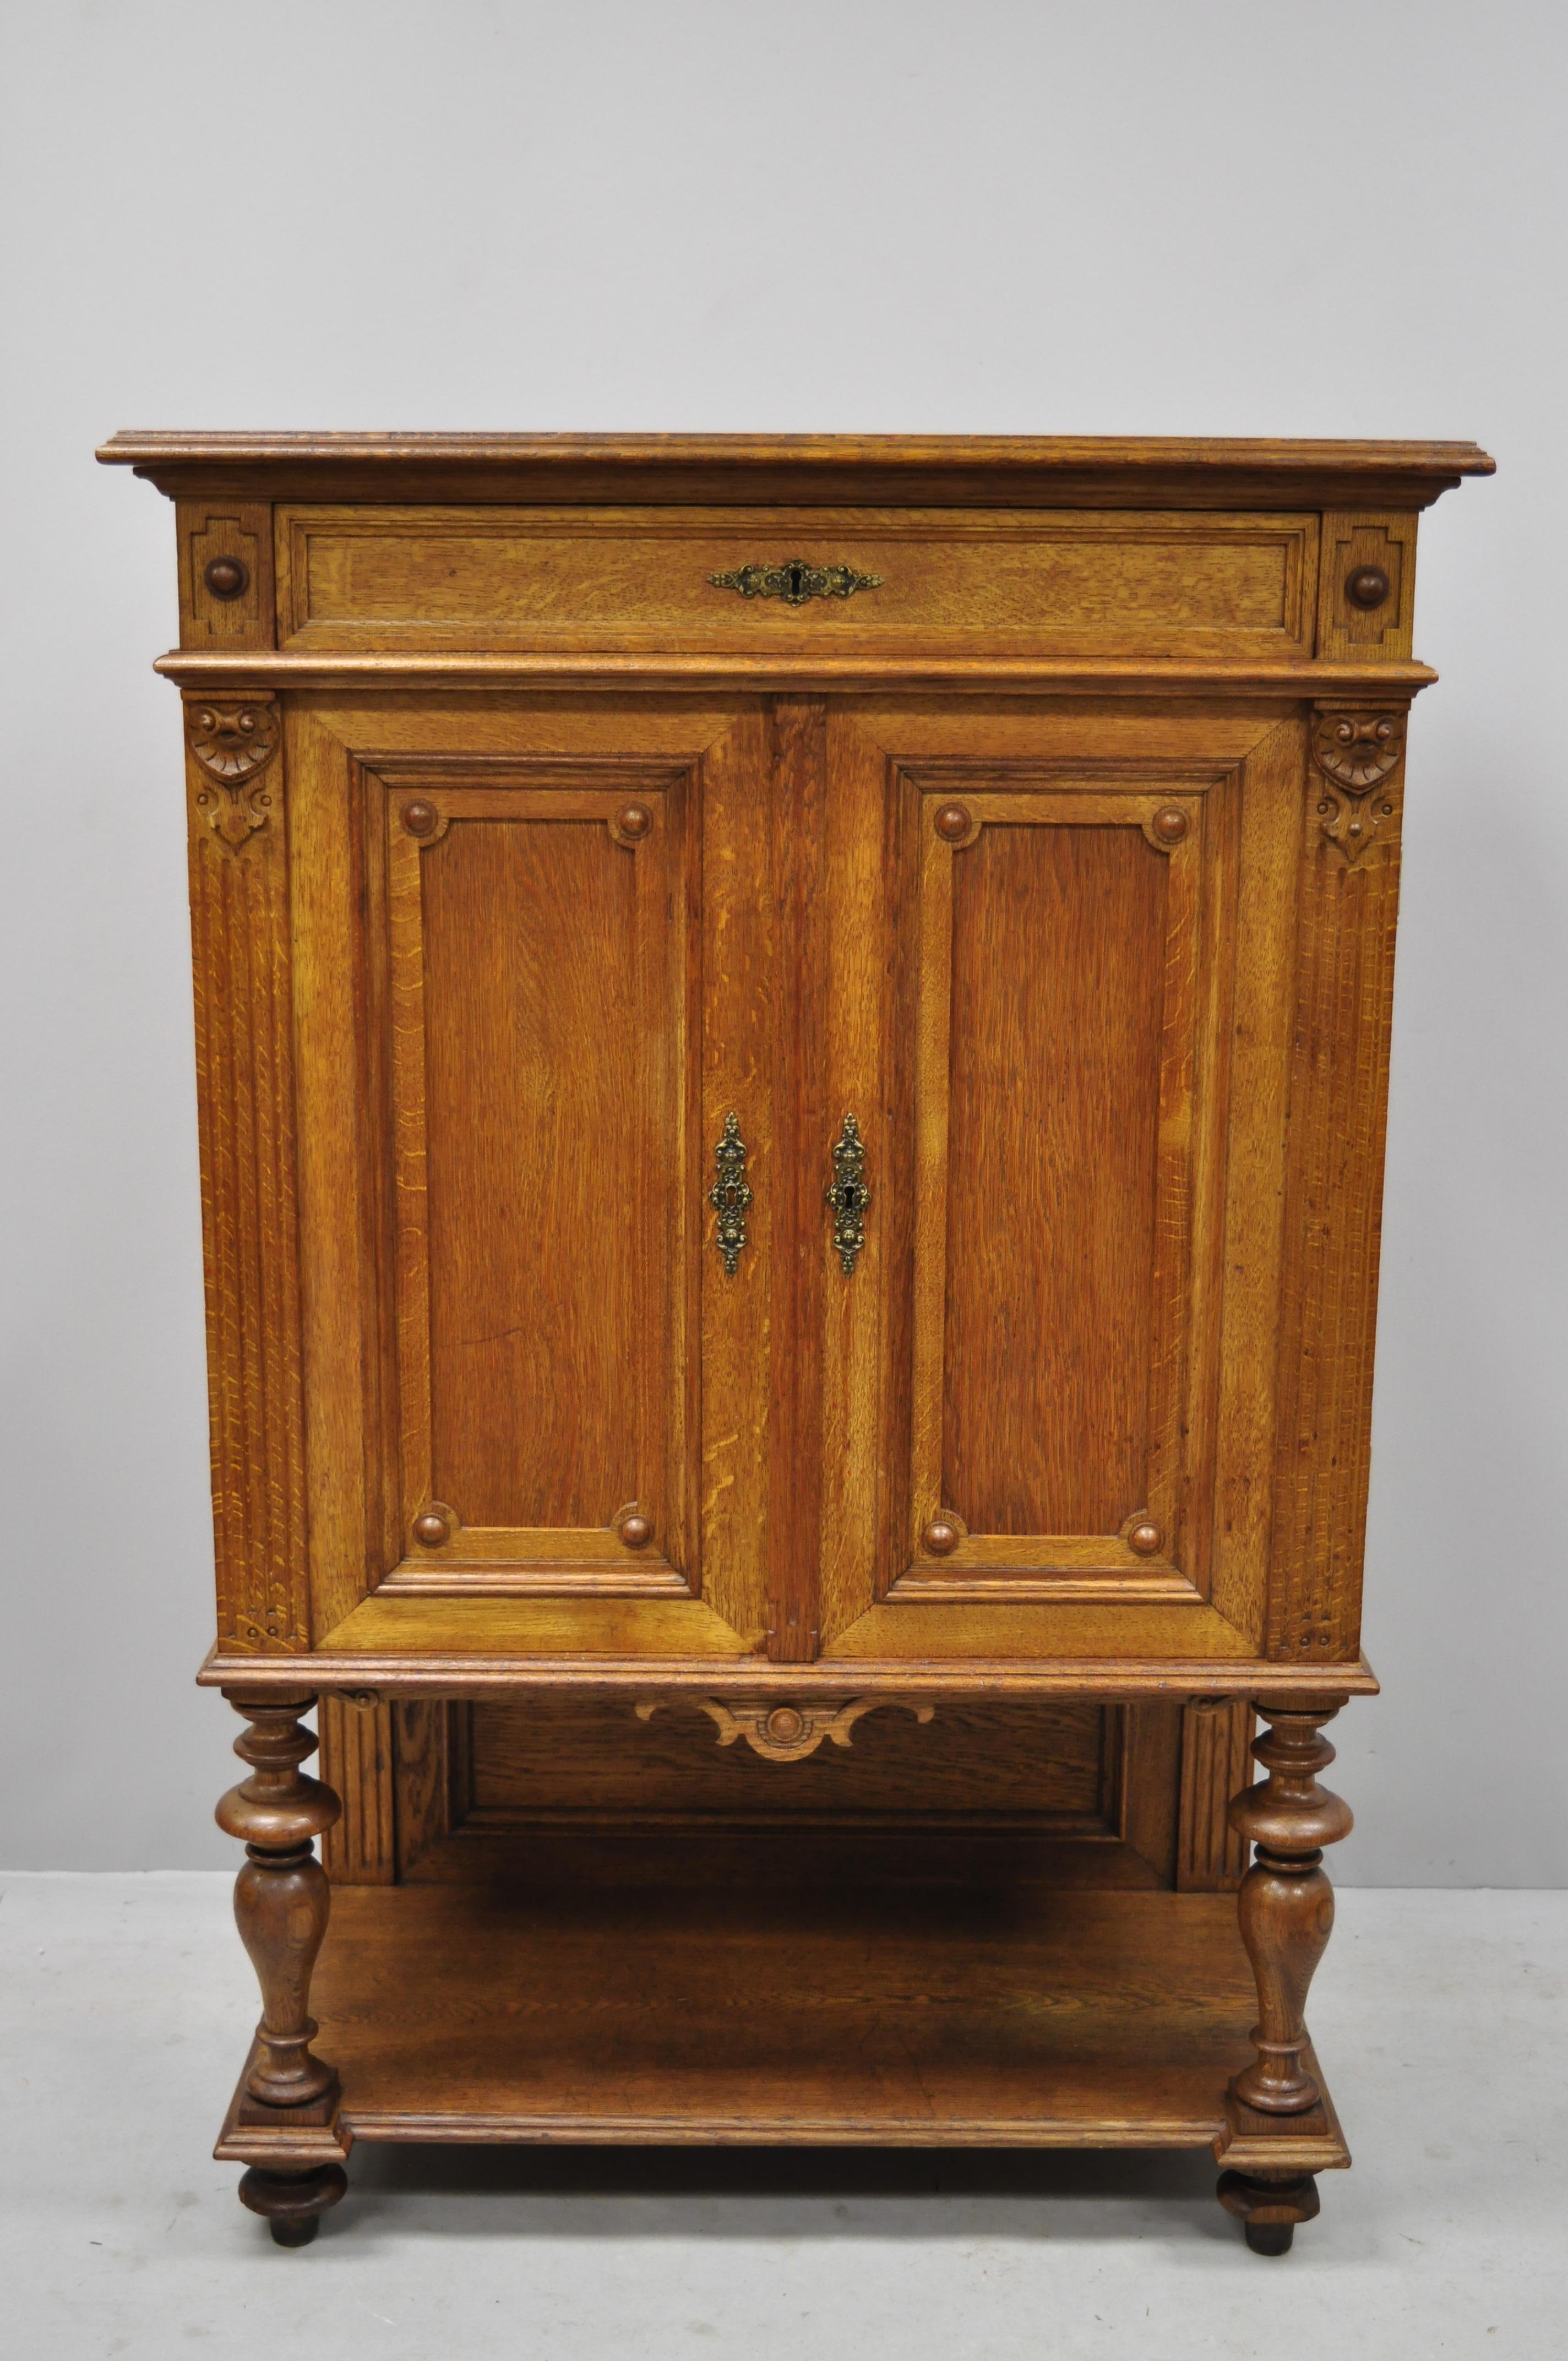 Early 20th French Renaissance style golden oakwood small cupboard China cabinet. Item features solid wood construction, beautiful wood grain, nicely carved details, 2 swing doors, 10 dovetailed drawers, 2 adjustable shelves, solid brass hardware,